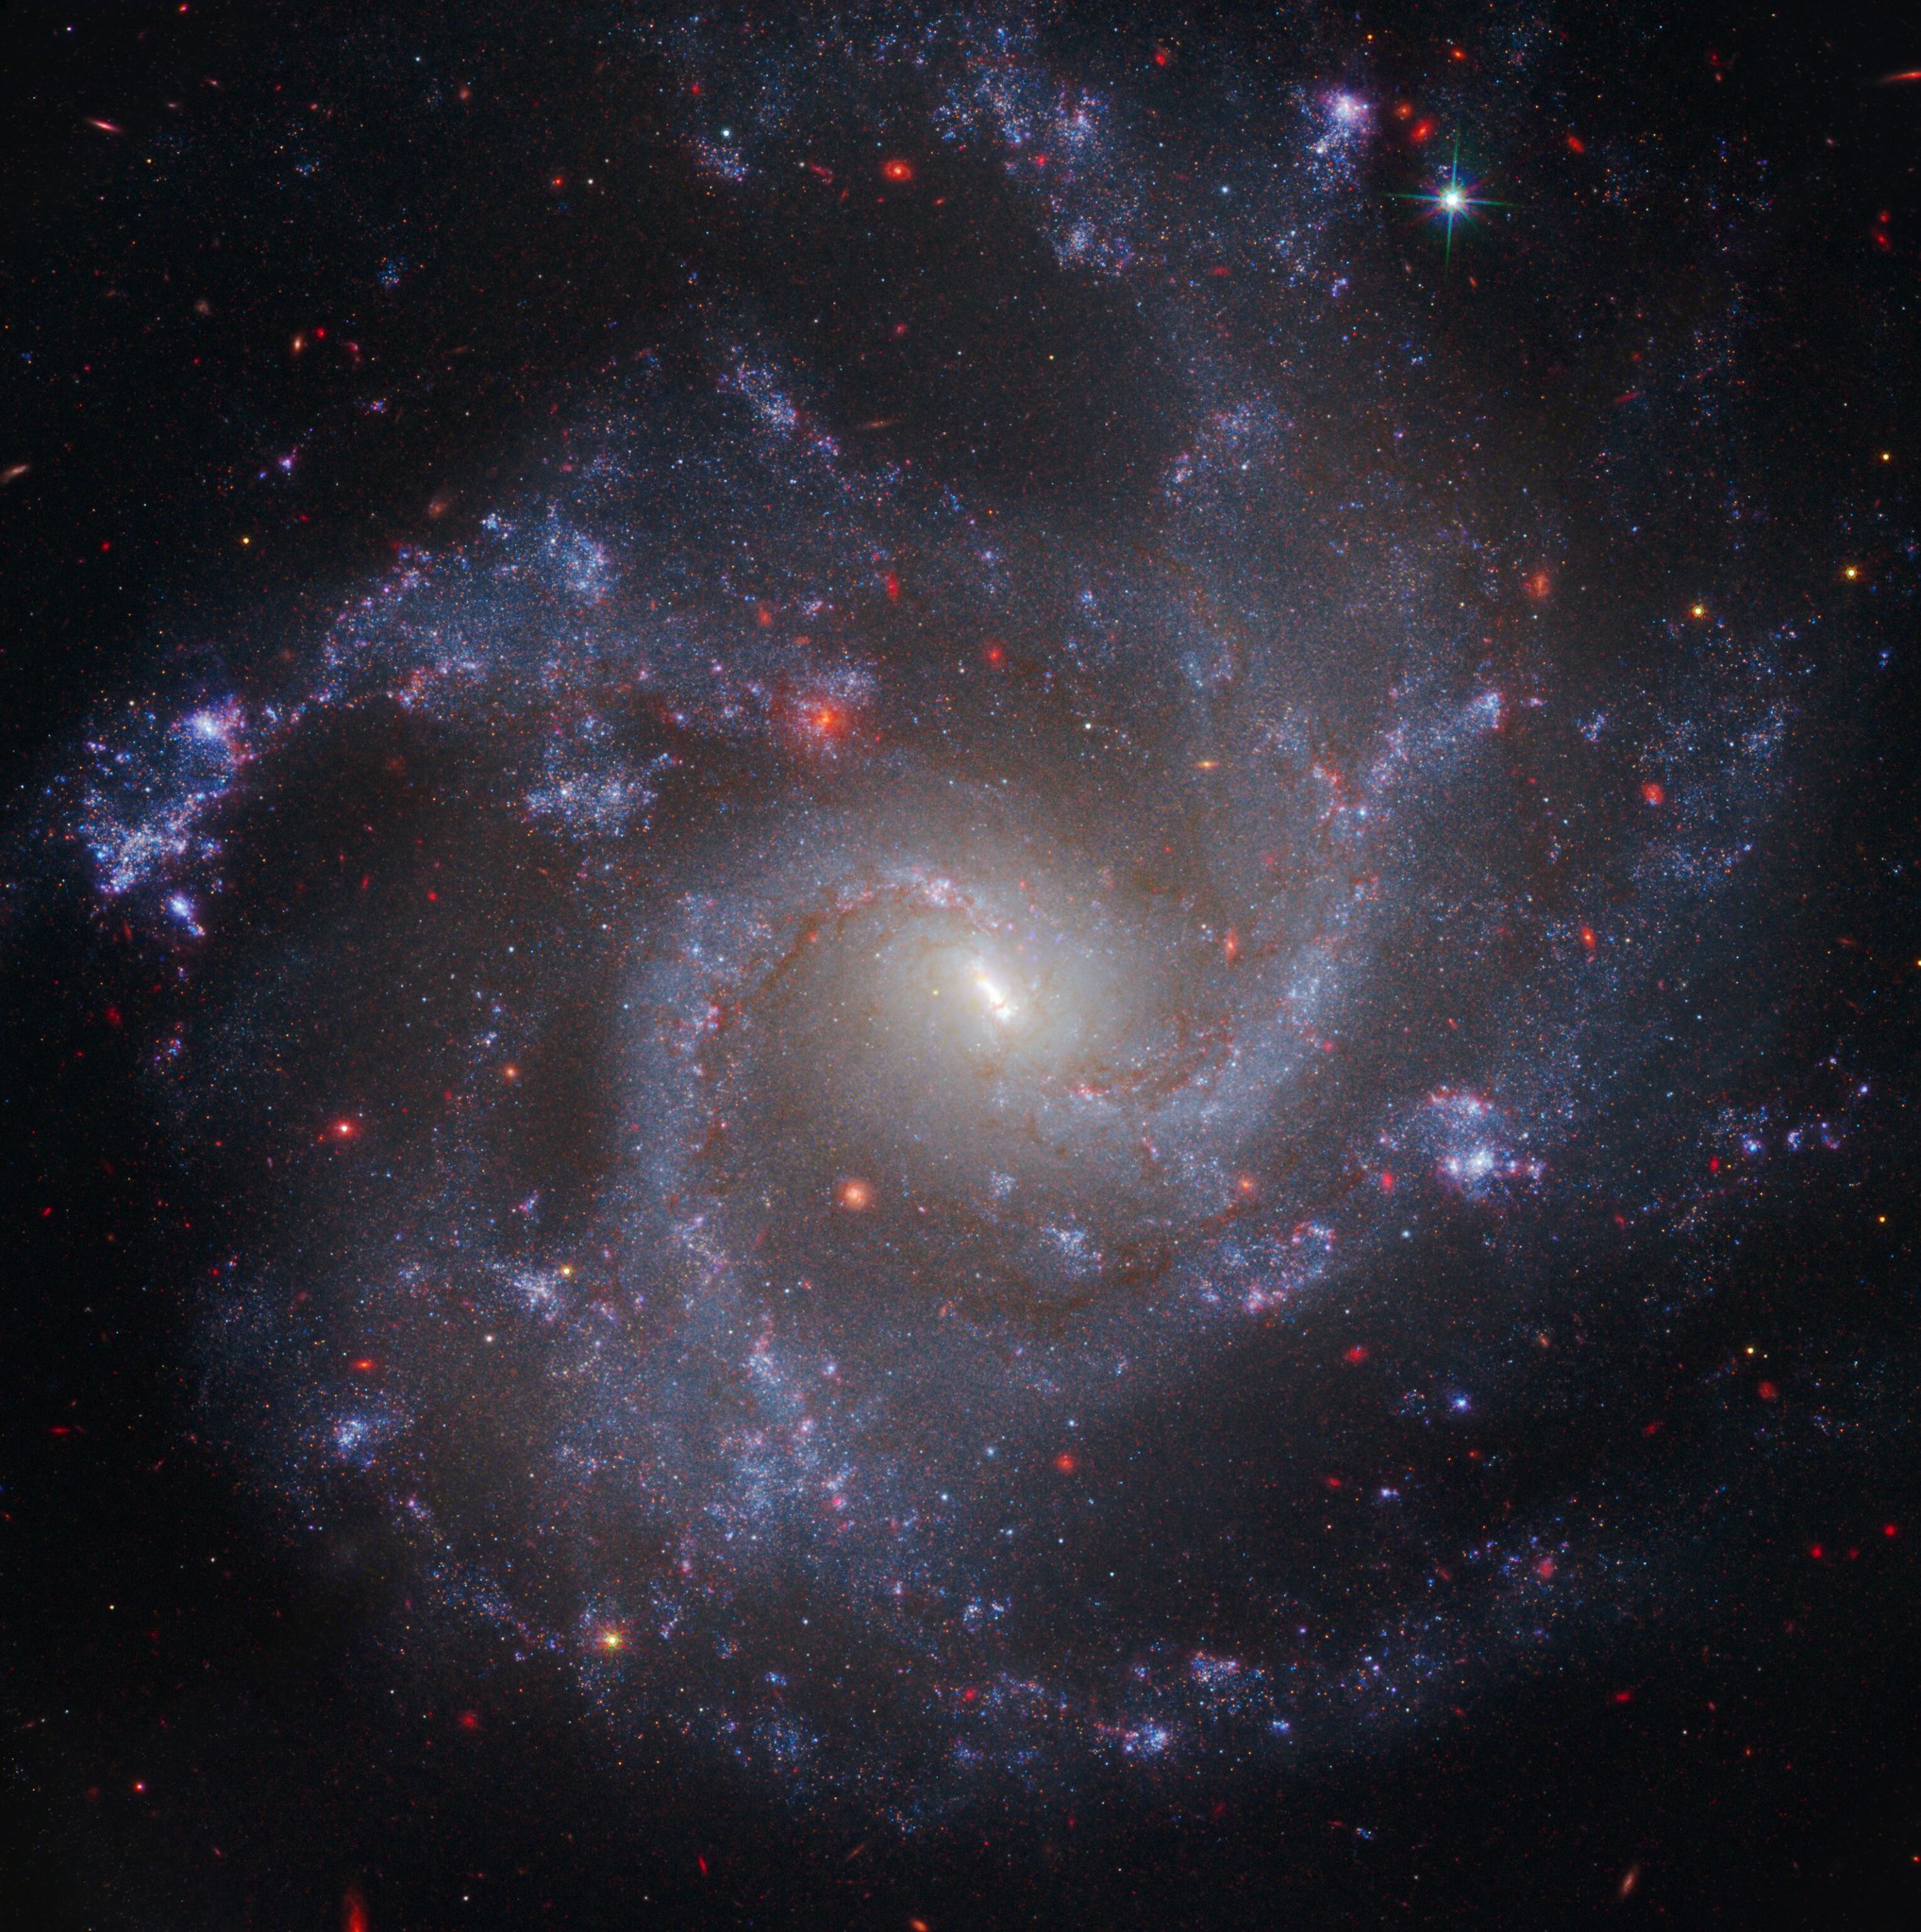 A directly opposed spiral galaxy with four spiral arms curving outward counterclockwise.  The spiral arms are filled with young, blue stars and peppered with purplish star-forming regions that appear as small blobs.  The center of the galaxy is much brighter and yellower, and has a distinct narrow linear bar at an angle of 11 o'clock to 5 o'clock.  Dozens of red background galaxies are scattered across the image.  The background of the room is black.